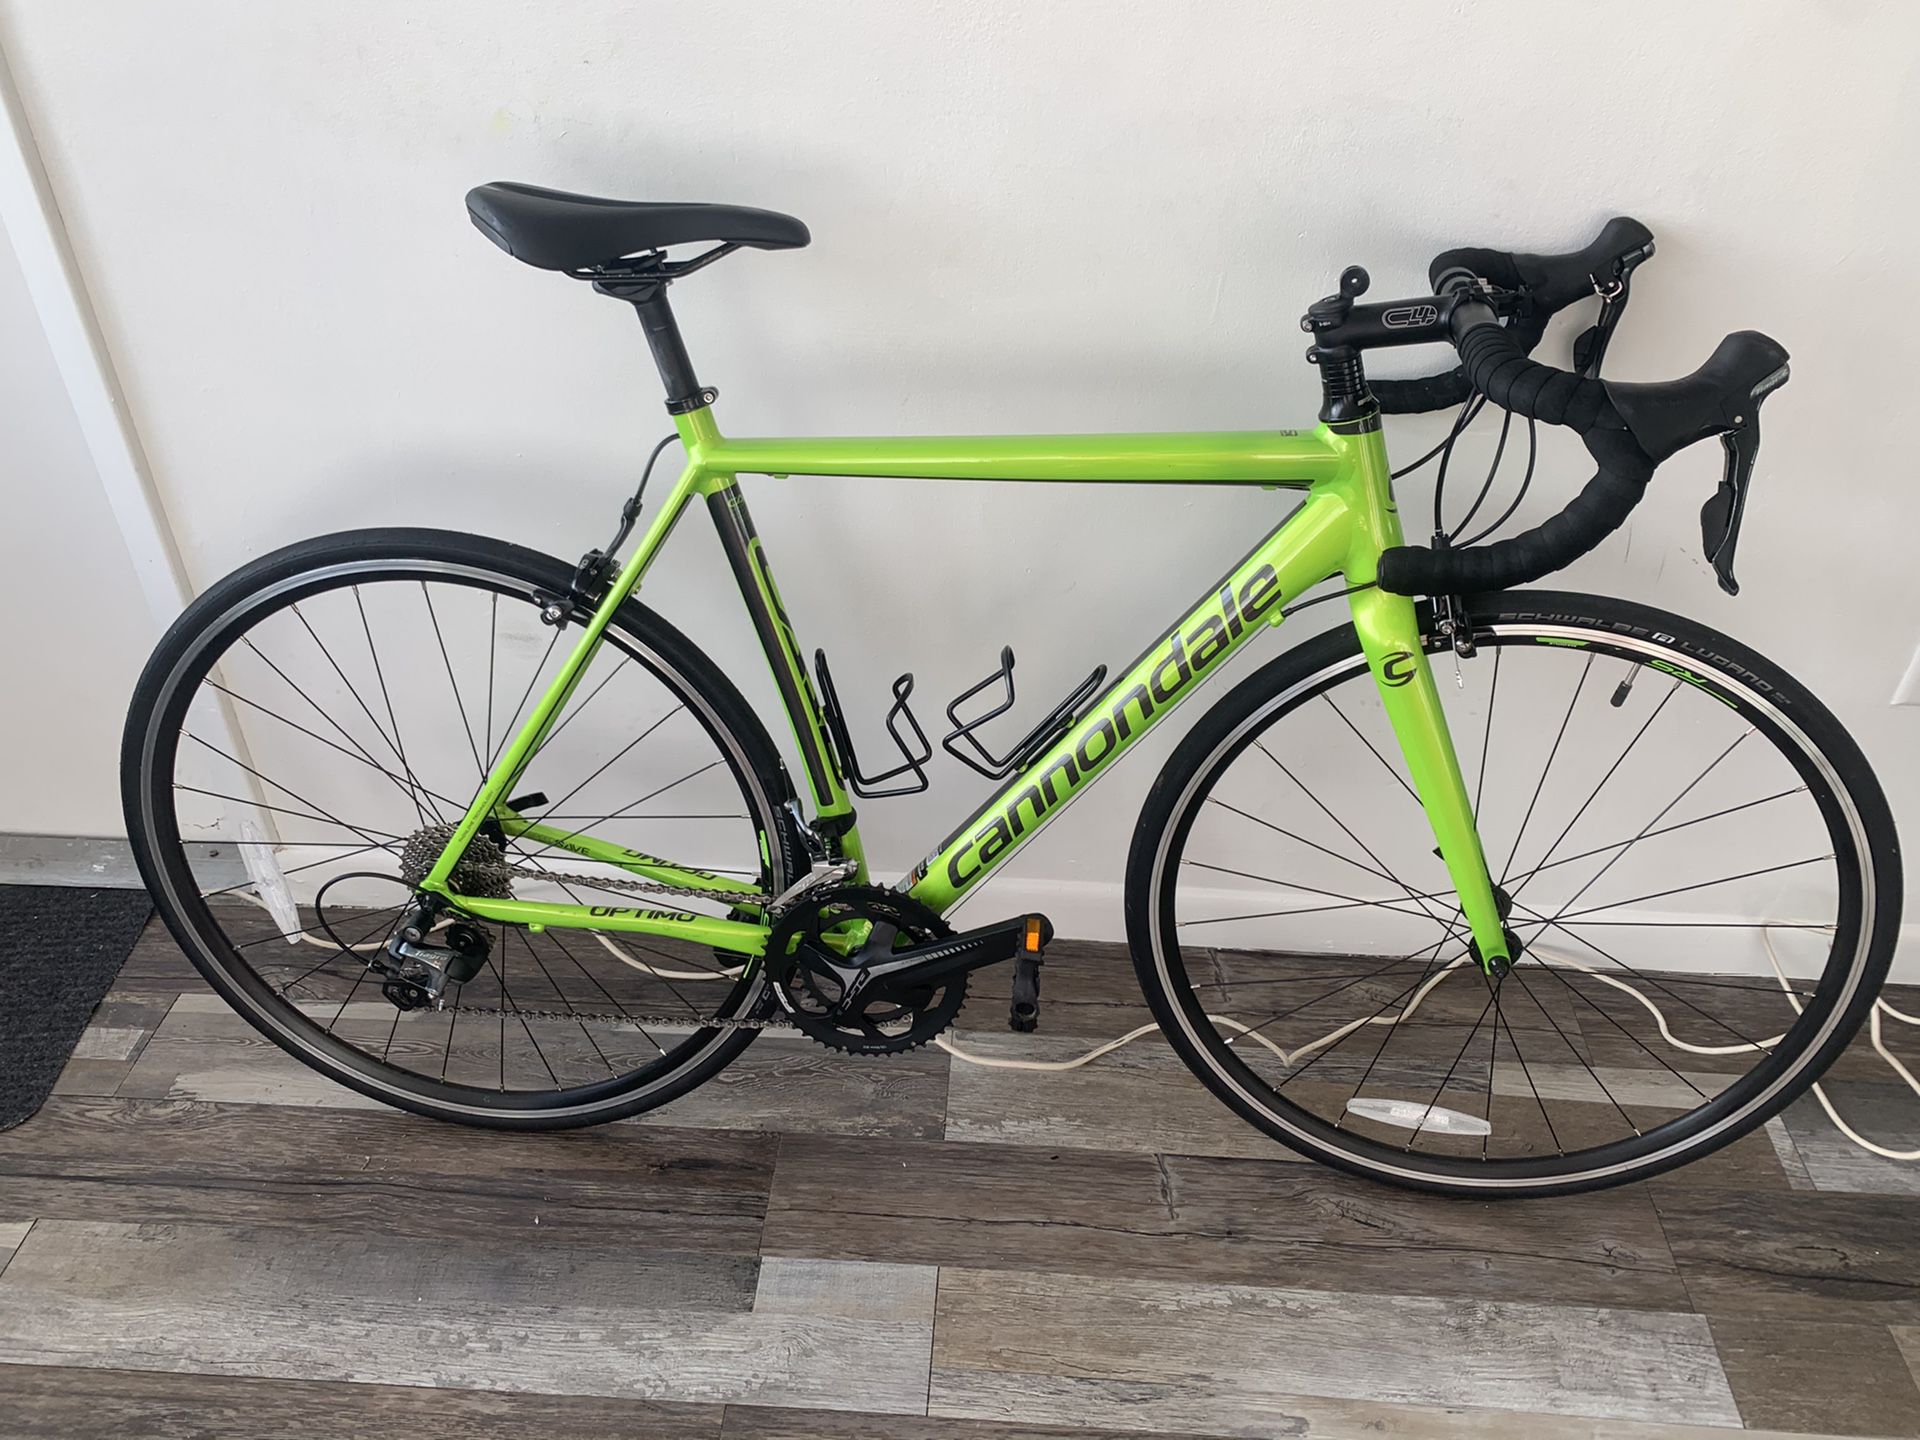 2019 Cannondale CAAD Optimo Tiagra Carbon forks